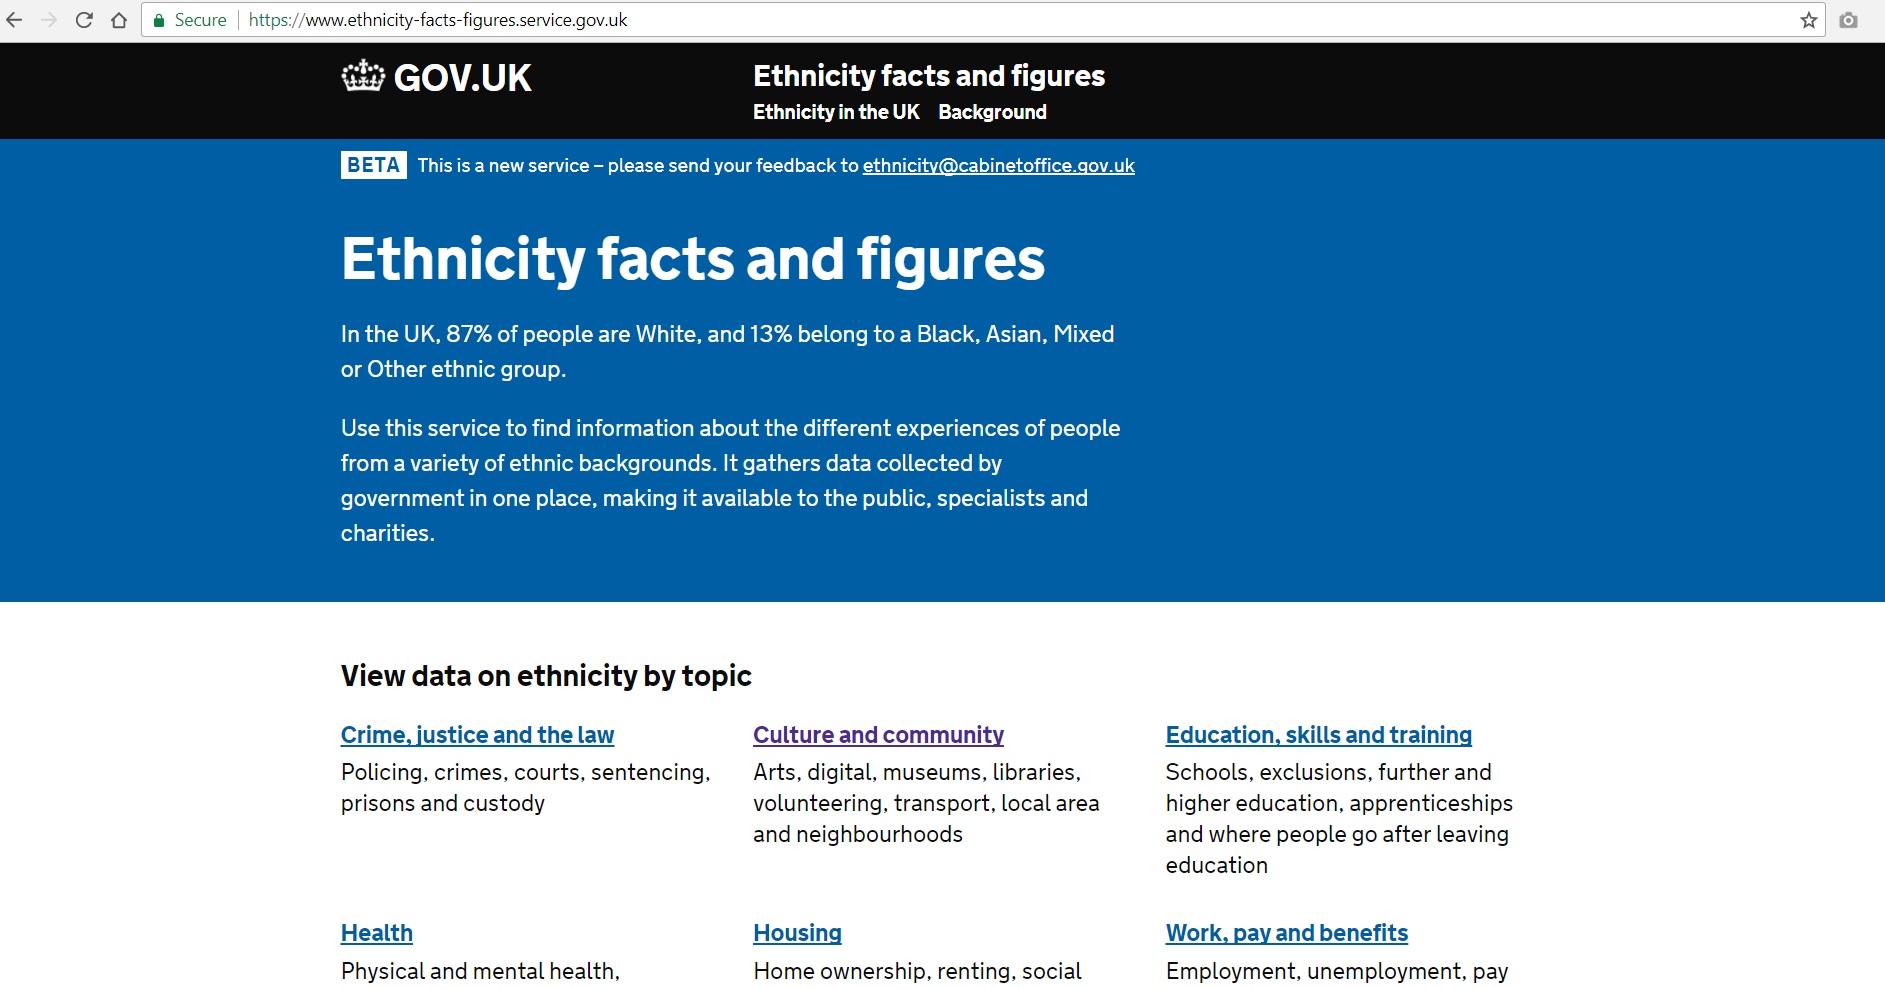 Equality facts and figures website screenshot